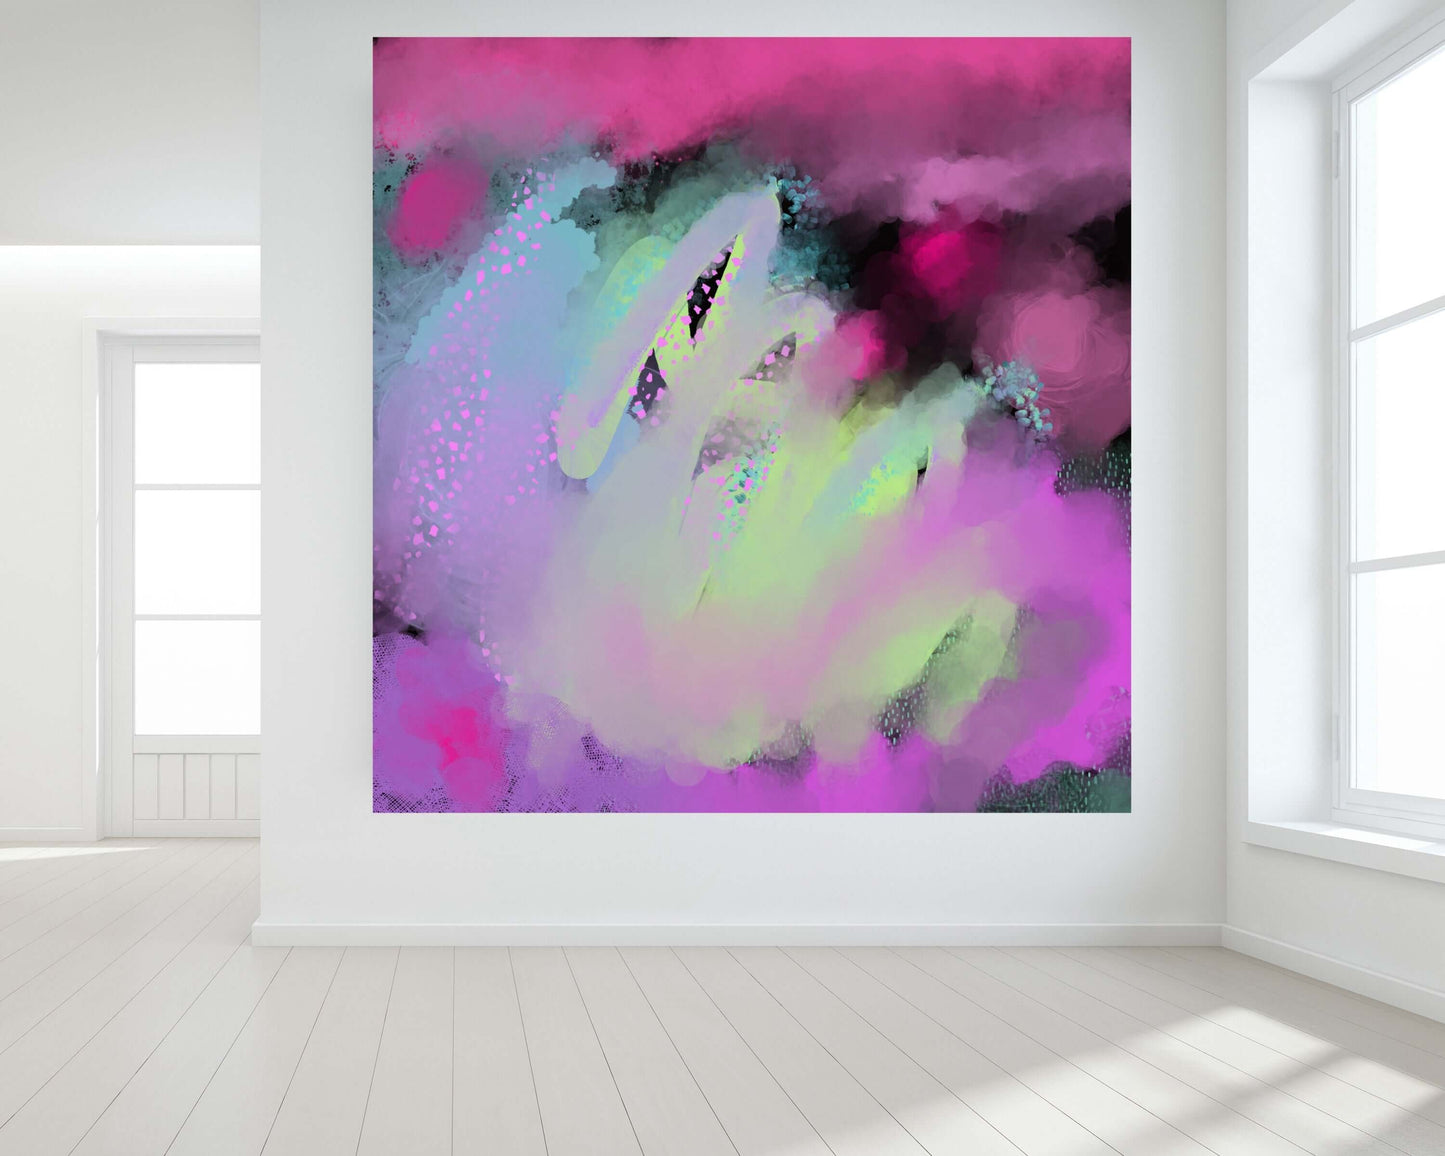 Magenta, Mint Green and Purples “Ode to Viva Magenta” Abstract Art Canvas Print Wall Art Large Canvas on Wall